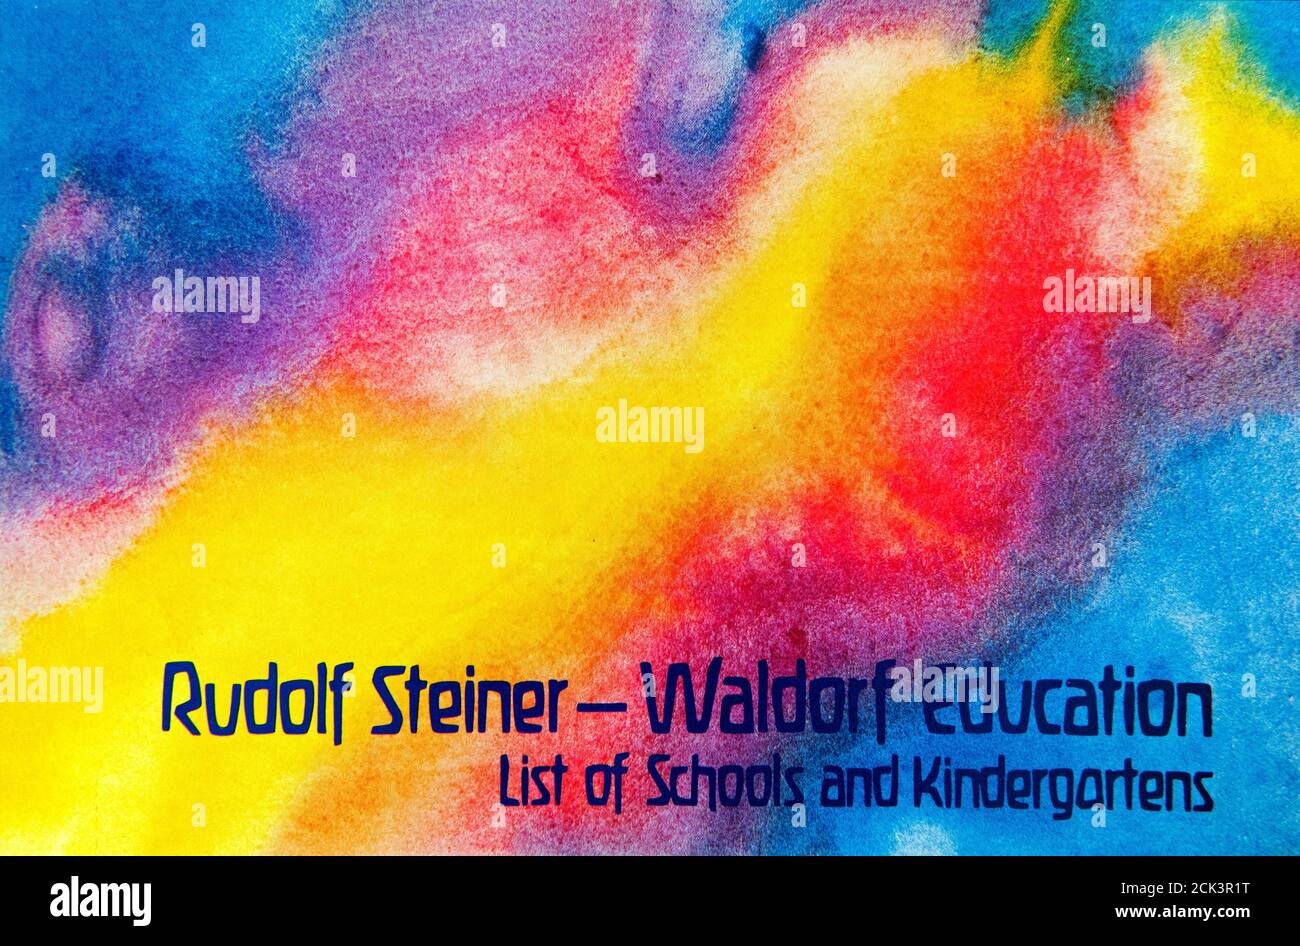 Rudolf Steiner - Waldorf Education colourful booklet, List of schools and Kindergartens.  For editorial use only Stock Photo